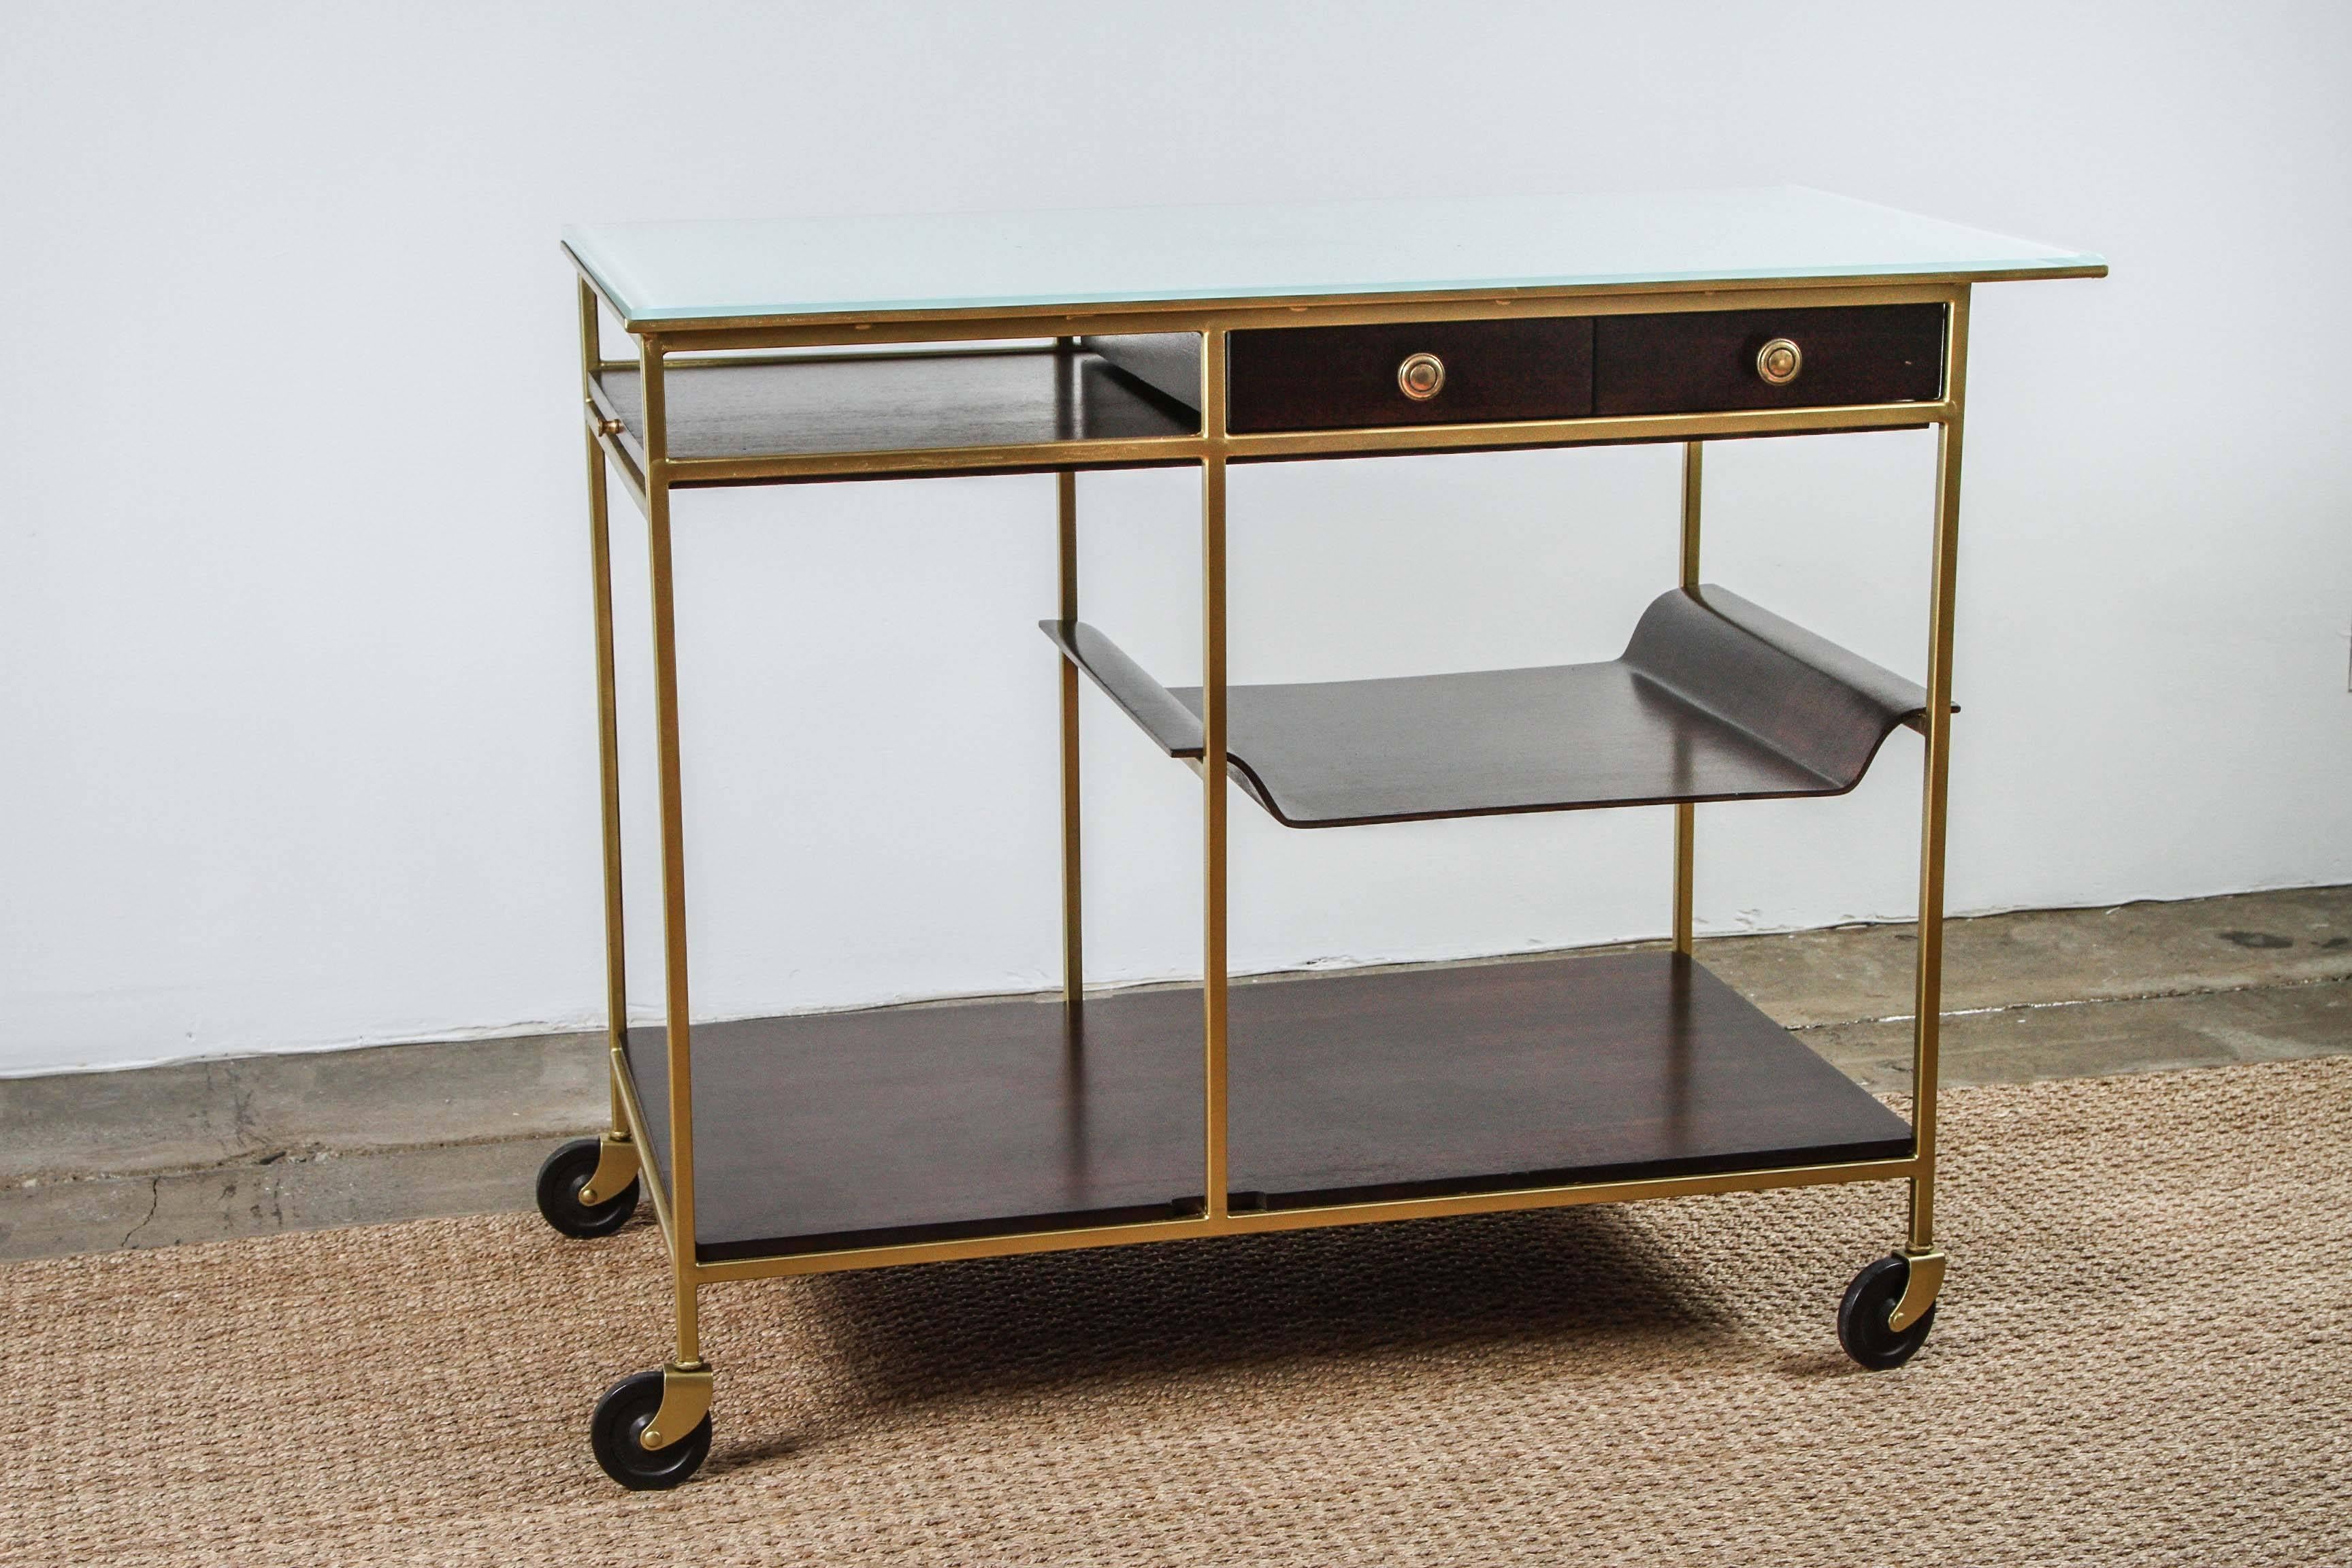 This rare Mid-Century Modern tea/bar cart was designed by Paul McCobb for the Irwin Collection by Calvin, Grand Rapids, USA, circa 1950s. It features a solid brass frame that rests on four casters; drawers and a removable tray; and a white milk